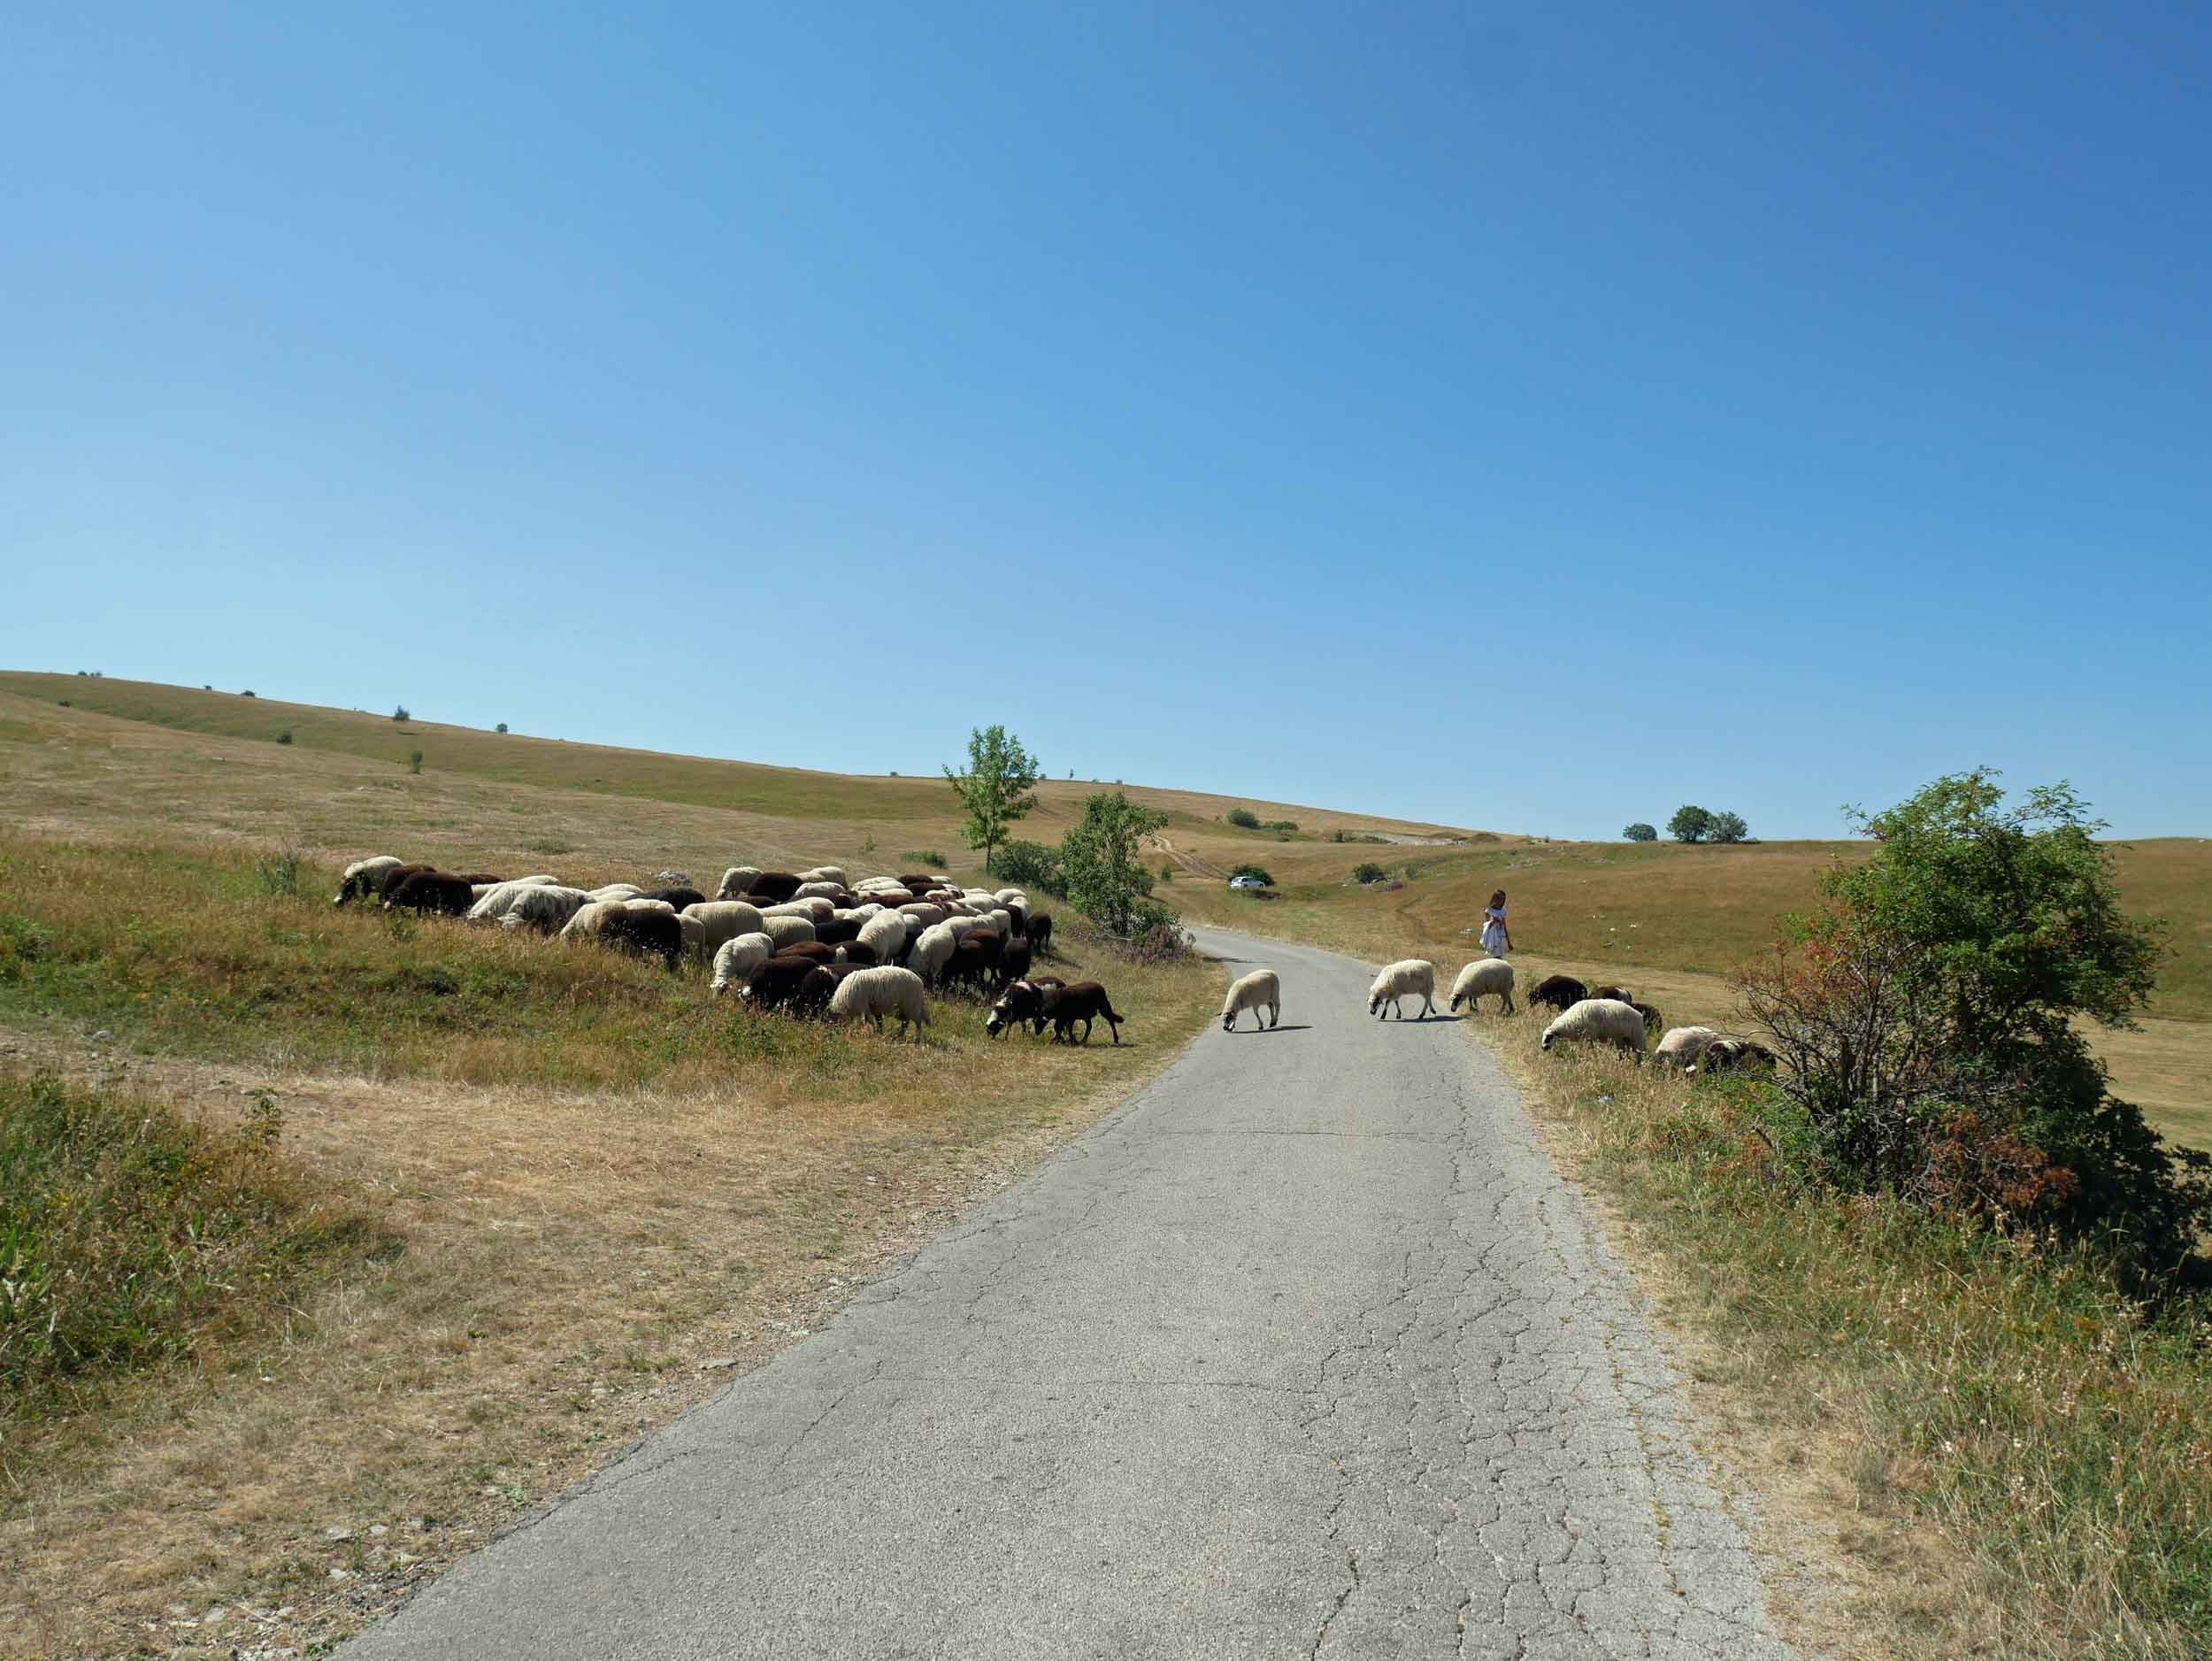  Although Durmitor became a protected national park in the mid-1950s, many farmers still toil the land and raise livestock in the hills.&nbsp; 